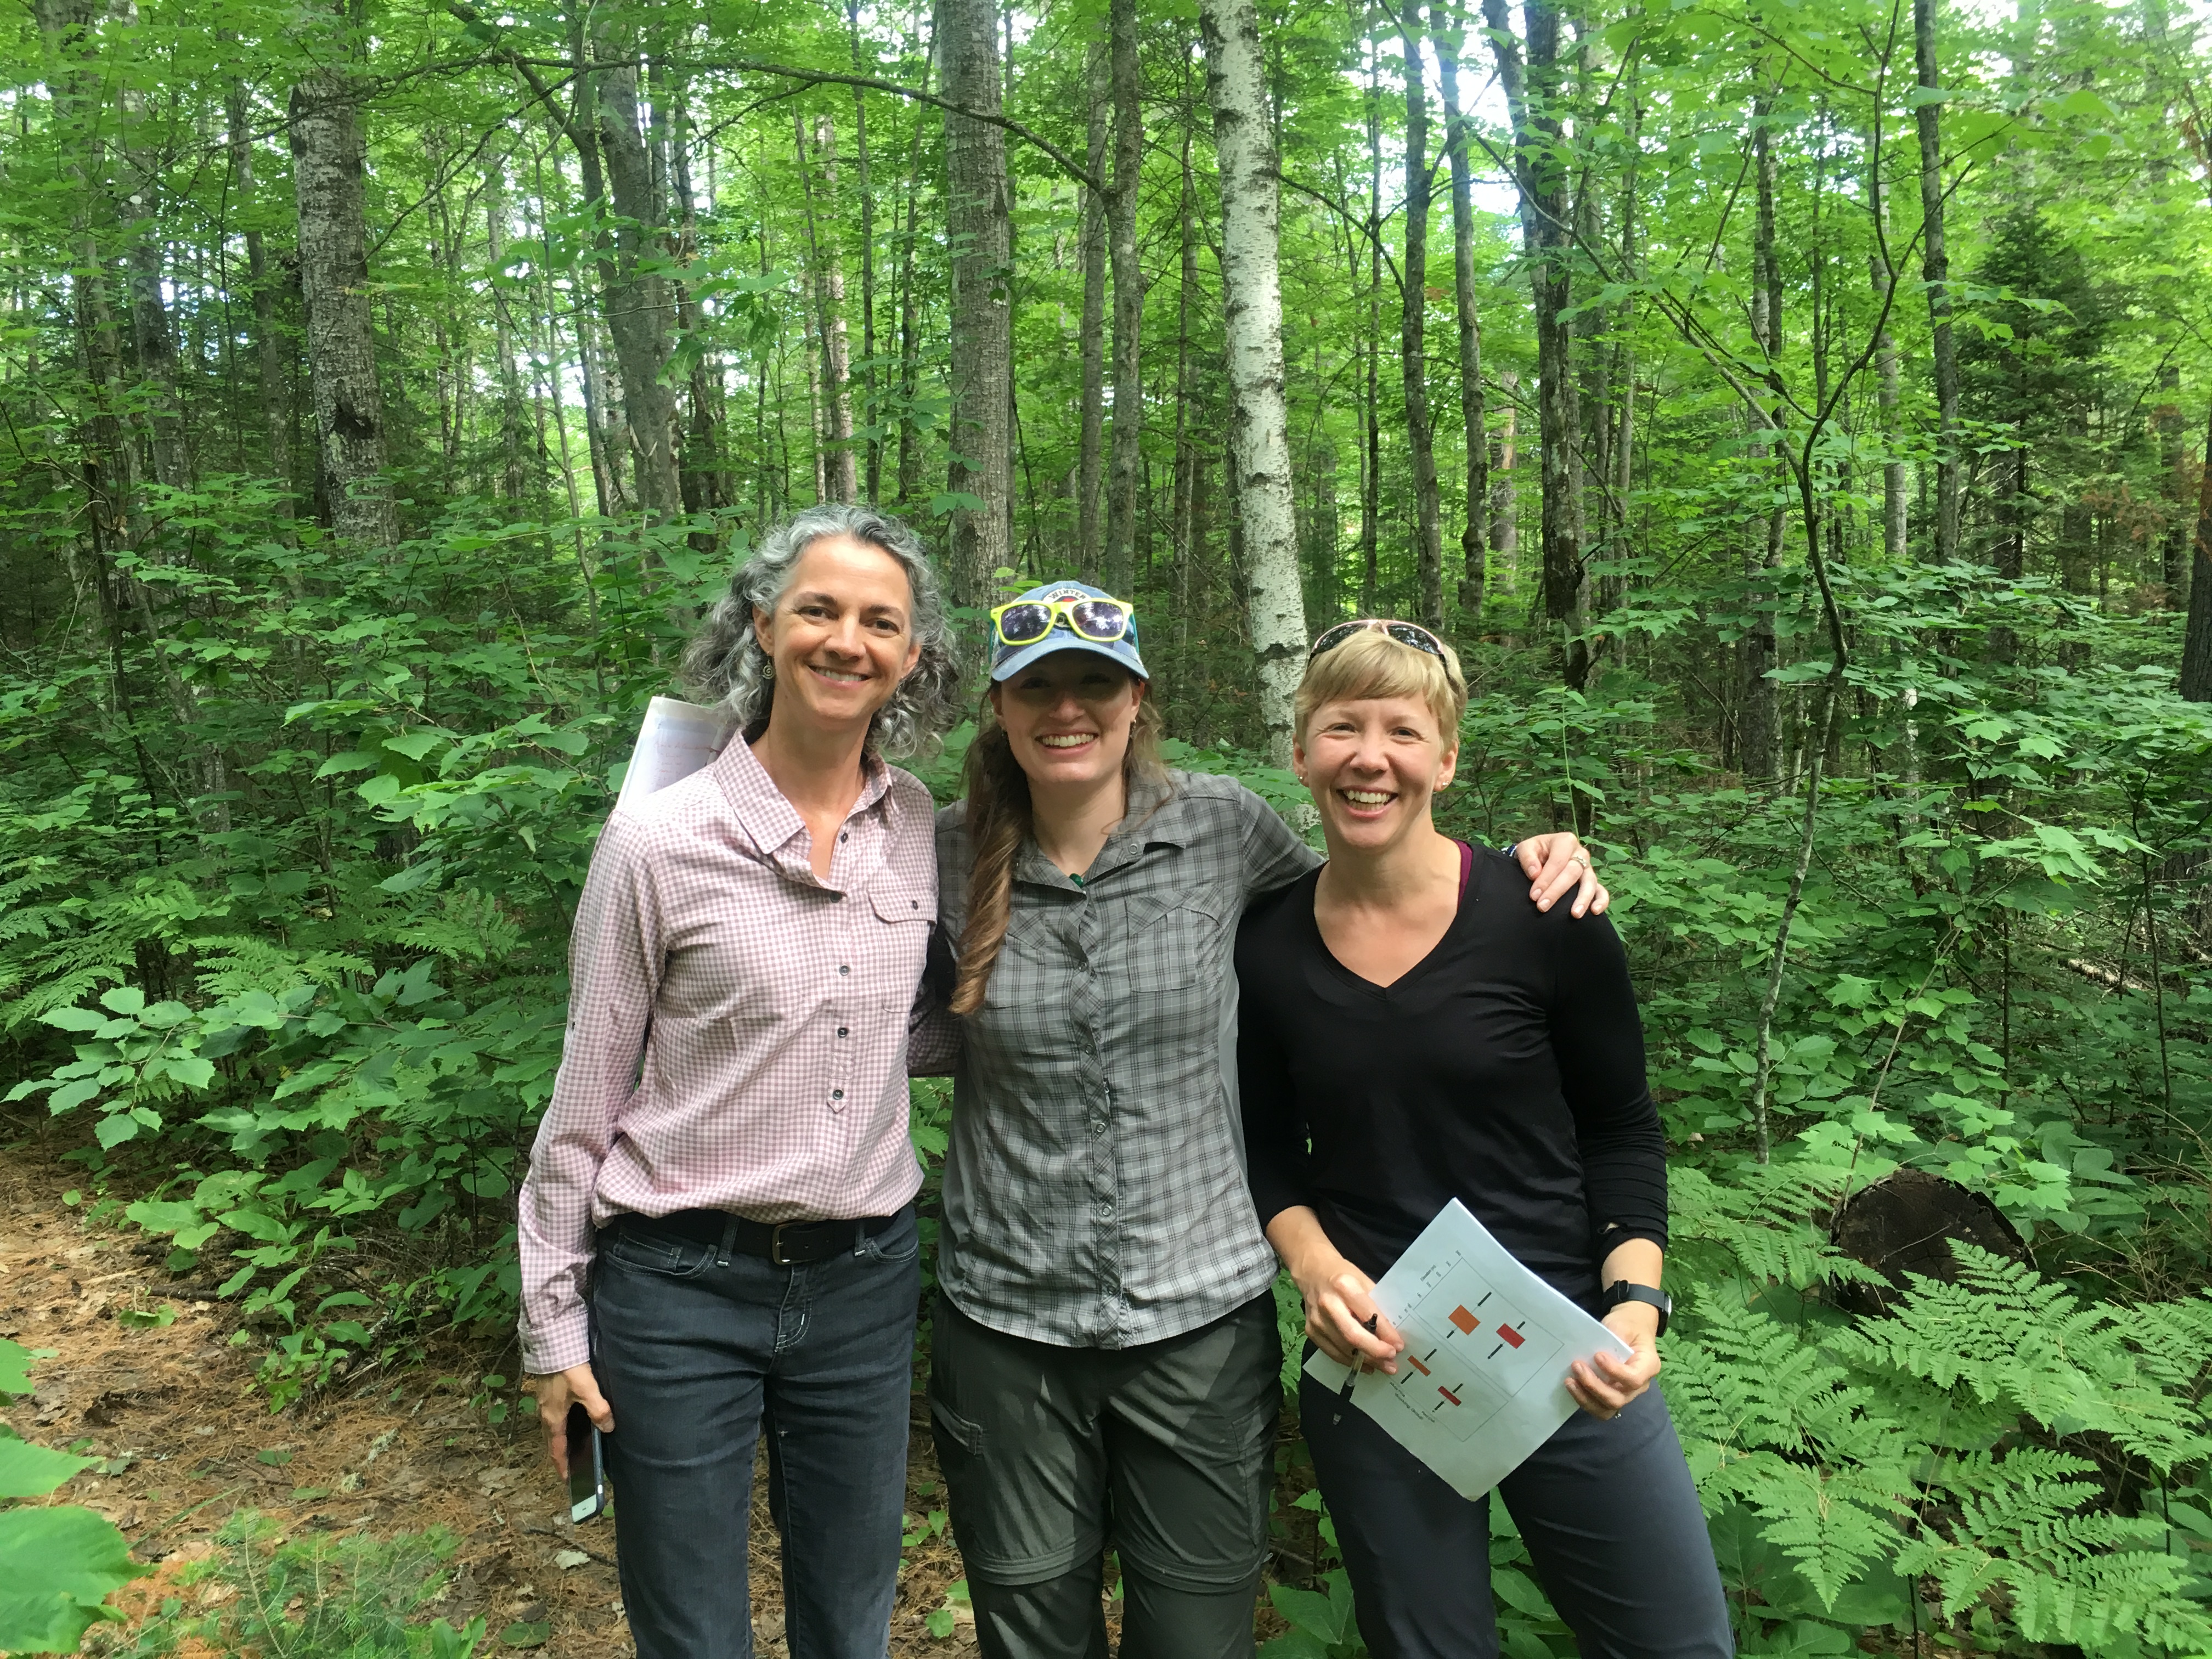 Linda Nagel, Courtney Peterson, and Maria Janowiak visit the Petawawa Research Forest, Ontario Canada, an Adaptive Silviculture for Climate Change Network site.